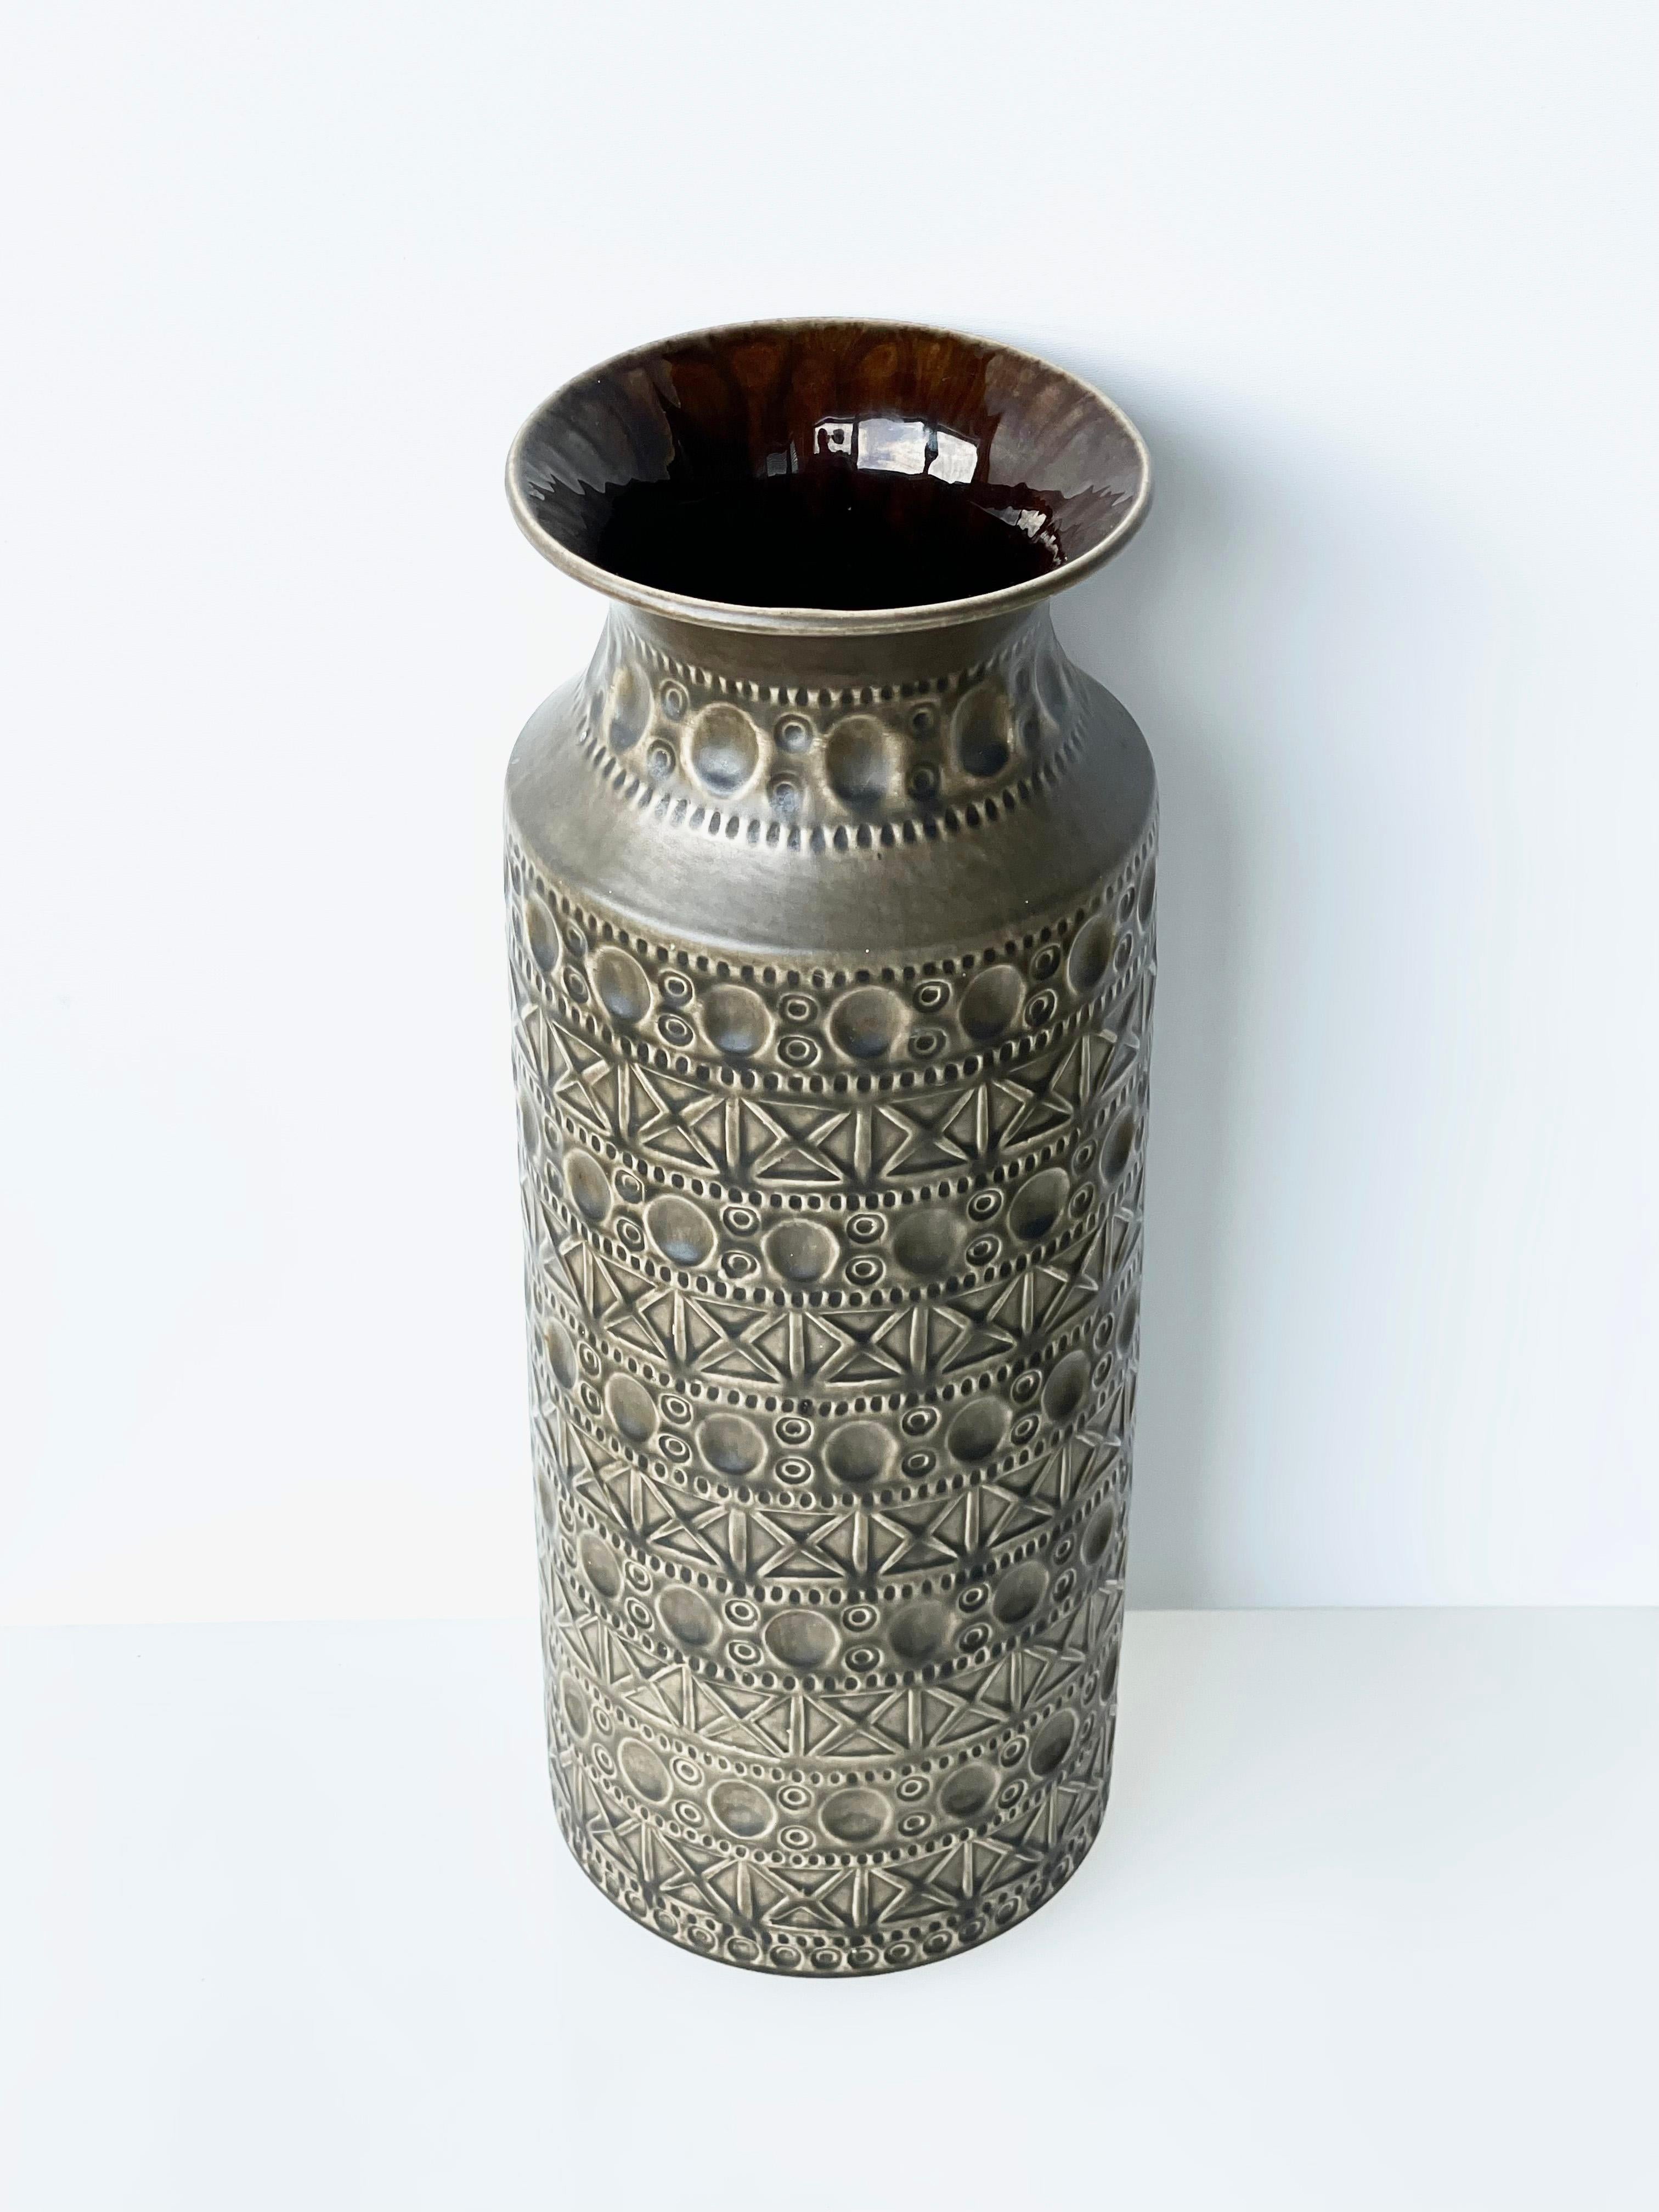 Bodo Mans Vase for Bay Keramik, West Germany ca. 1970 In Excellent Condition For Sale In Bern, CH